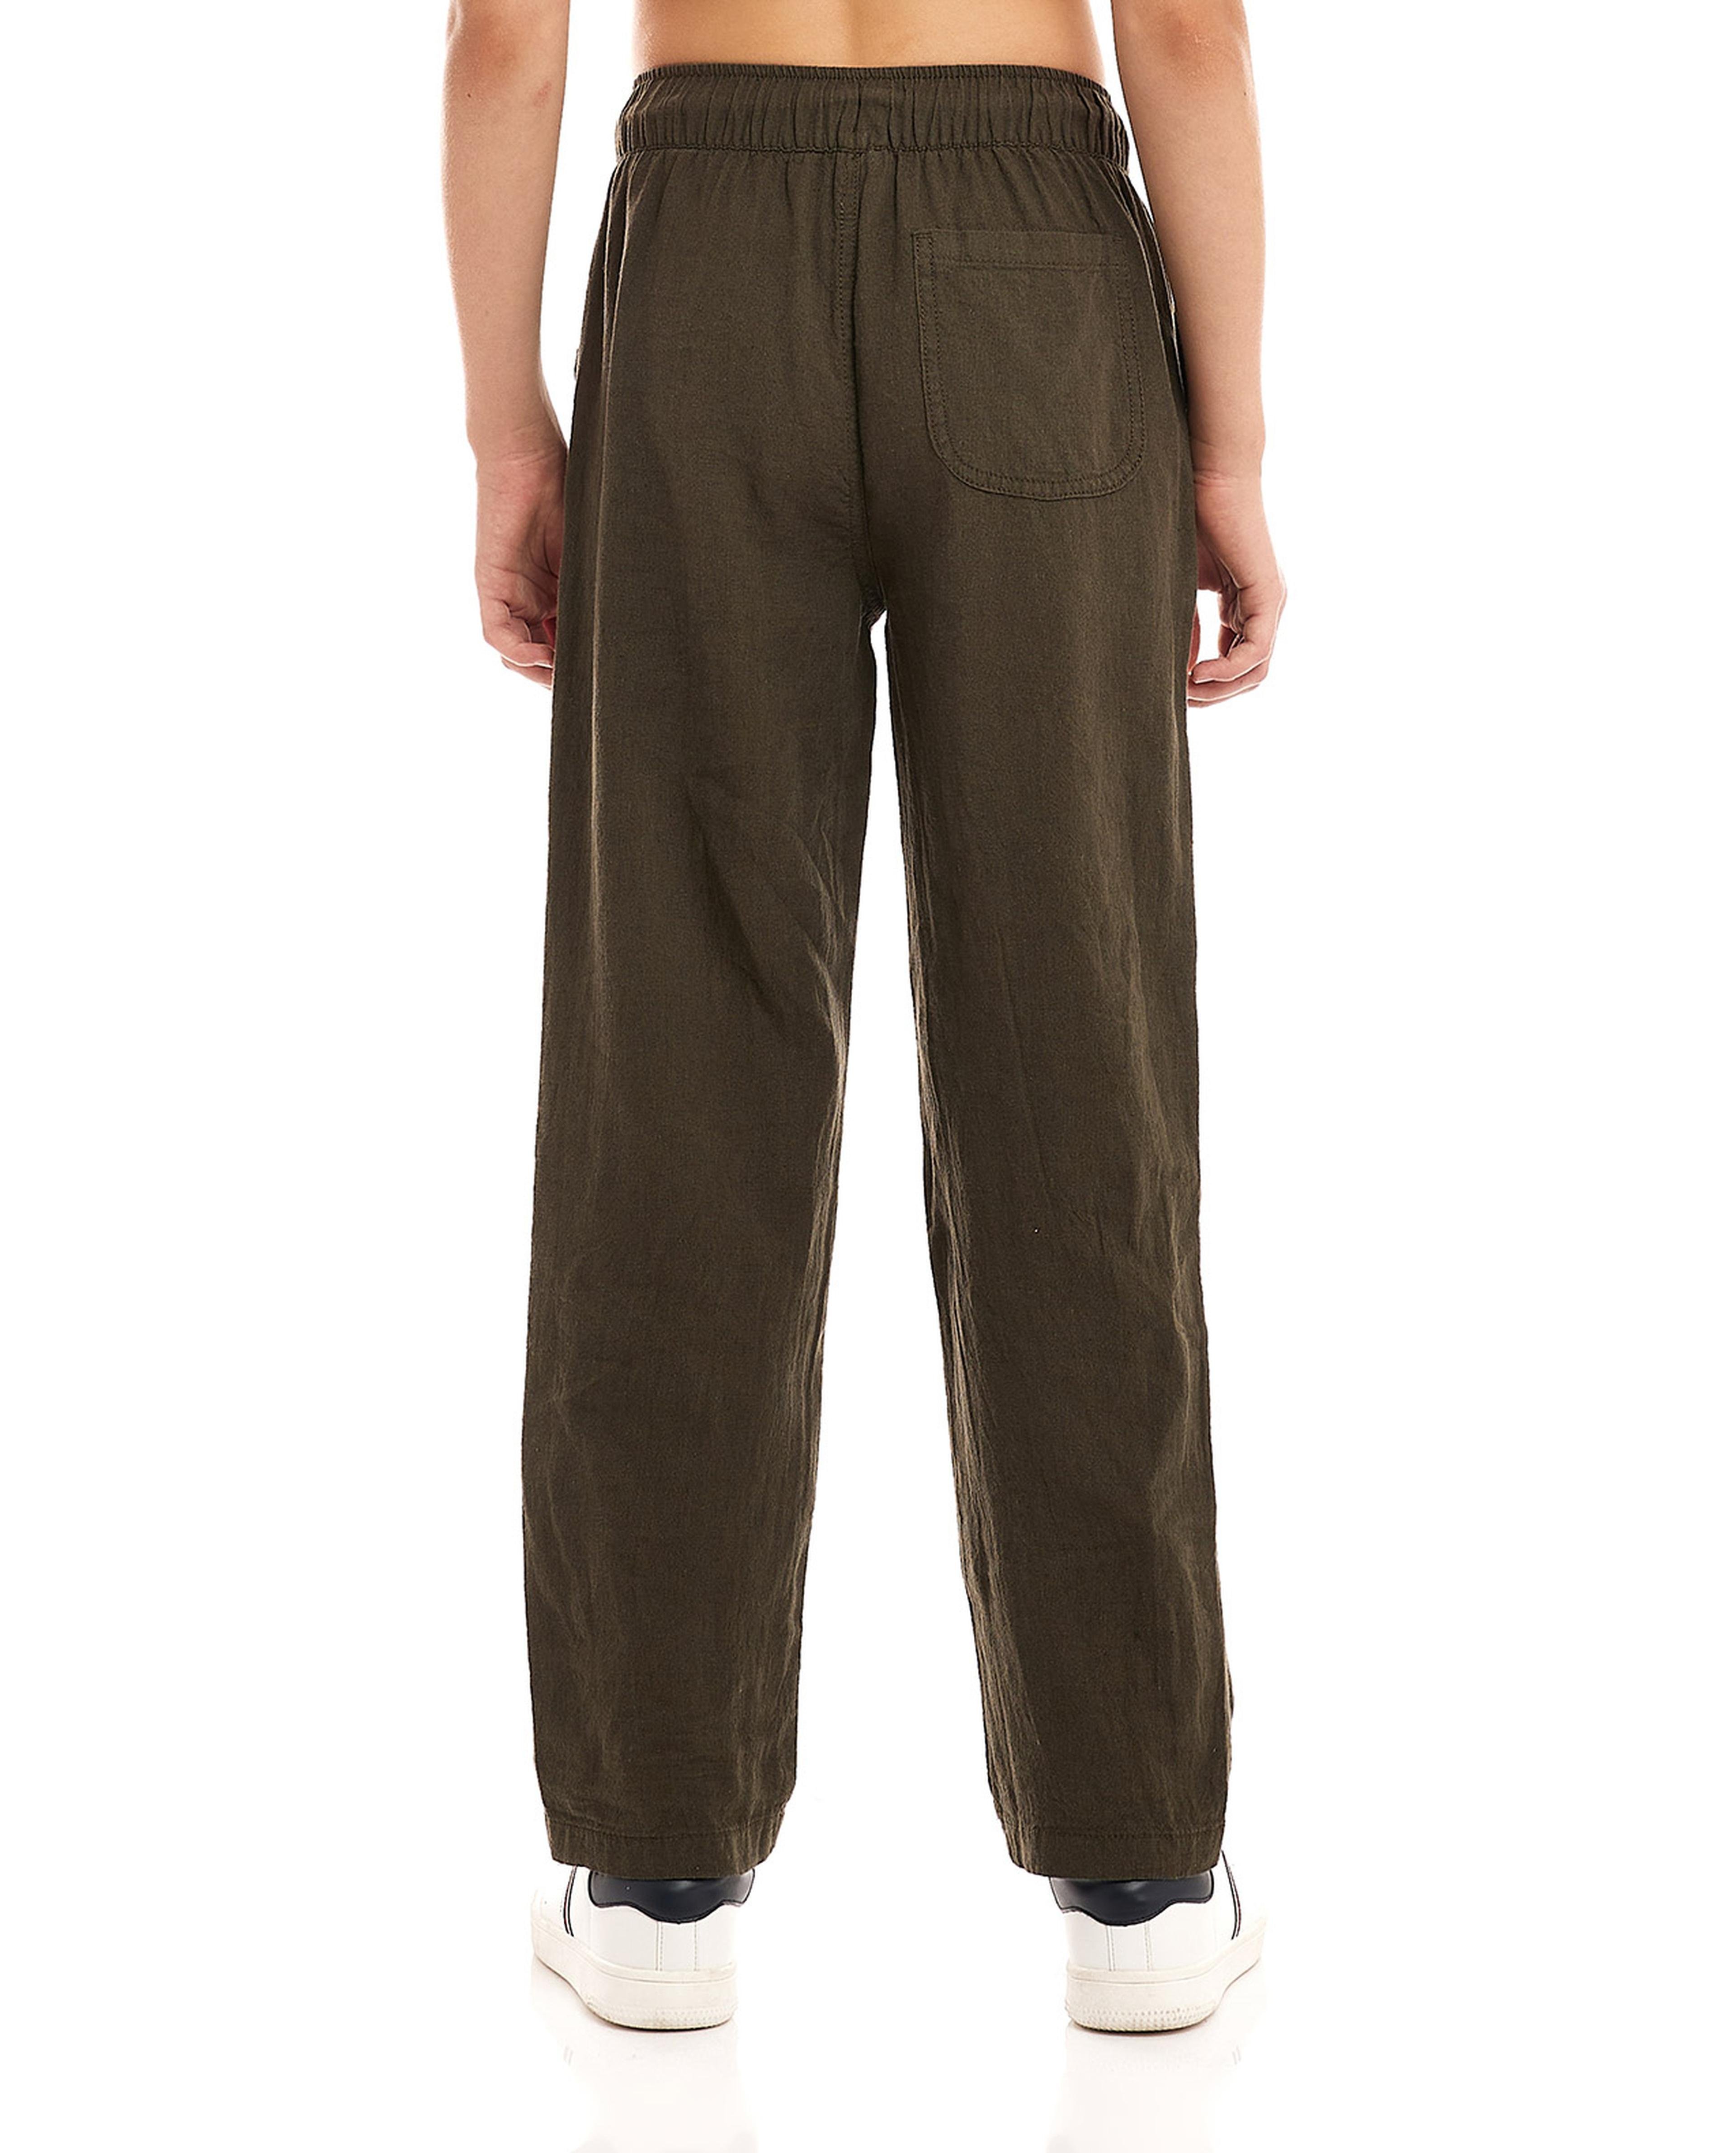 Woven Pants with Drawstring Waist